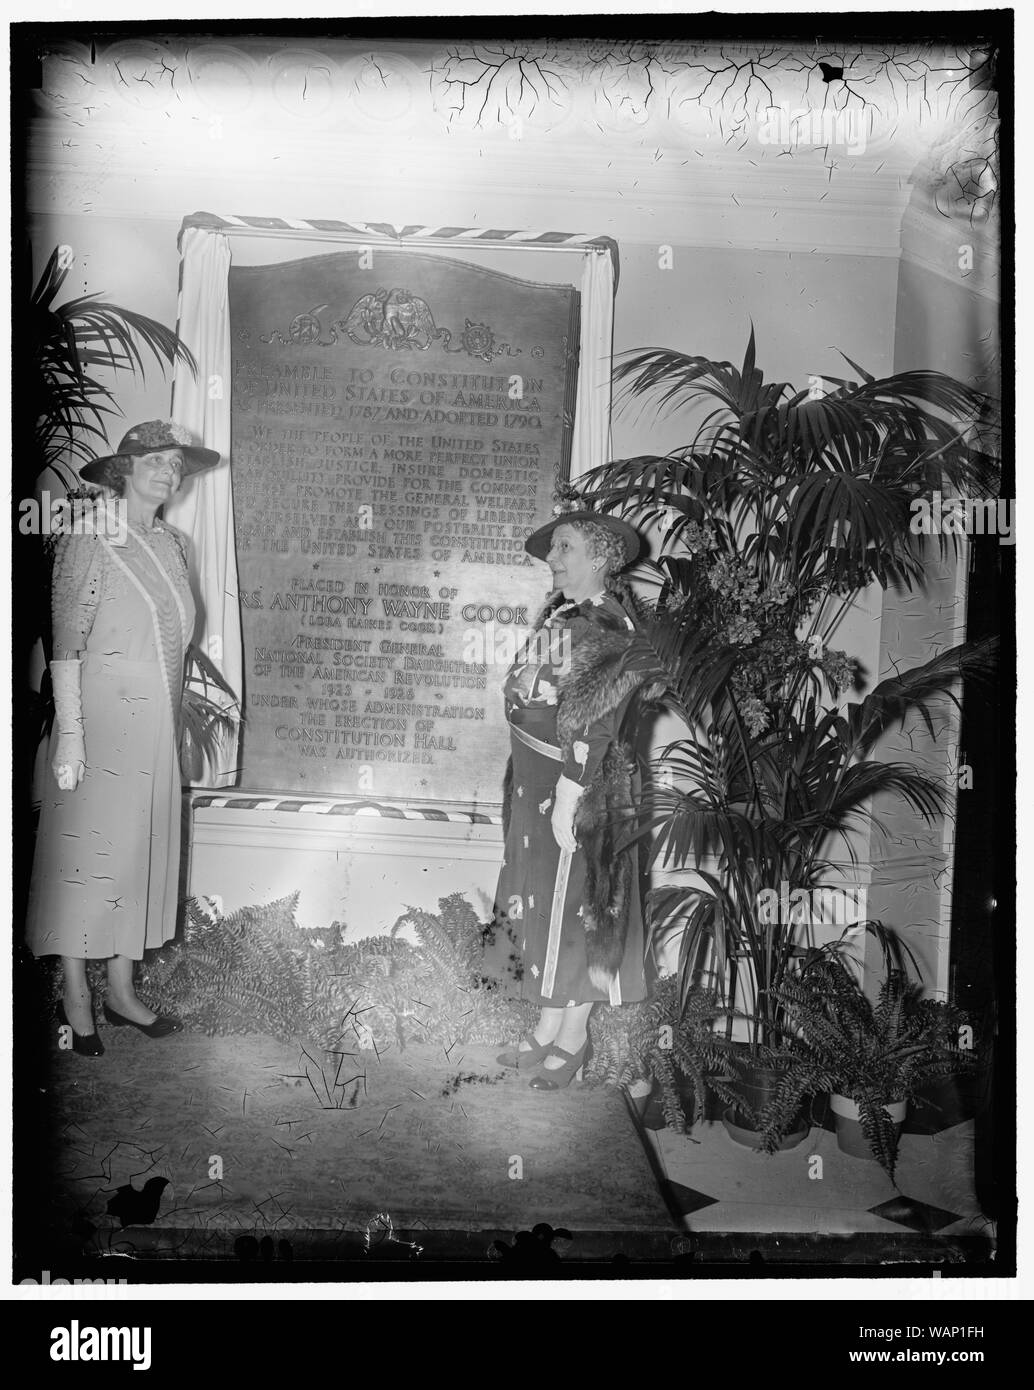 D.A.R. honors Mrs. Anthony Wayne Cook. Washington, D.C., April 17. A bronze tablet inscribed with the preamble to the Constitution was unveiled at the D.A.R. Constitution Hall in honor of Mrs. Anthony Wayne Cook, of Cooksburg, Pa. Mrs. Cook was President General of the D.A.R. from 1925 to 1926 and is now honorary President General. The Hall was built during her administration. Left to right at the unveiling are: Mrs. William A. Becker; President General who accepted the tablet; and Mrs. Harper D. Sheppard of Pa., who unveiled the memorial, 4/17/1937 Stock Photo